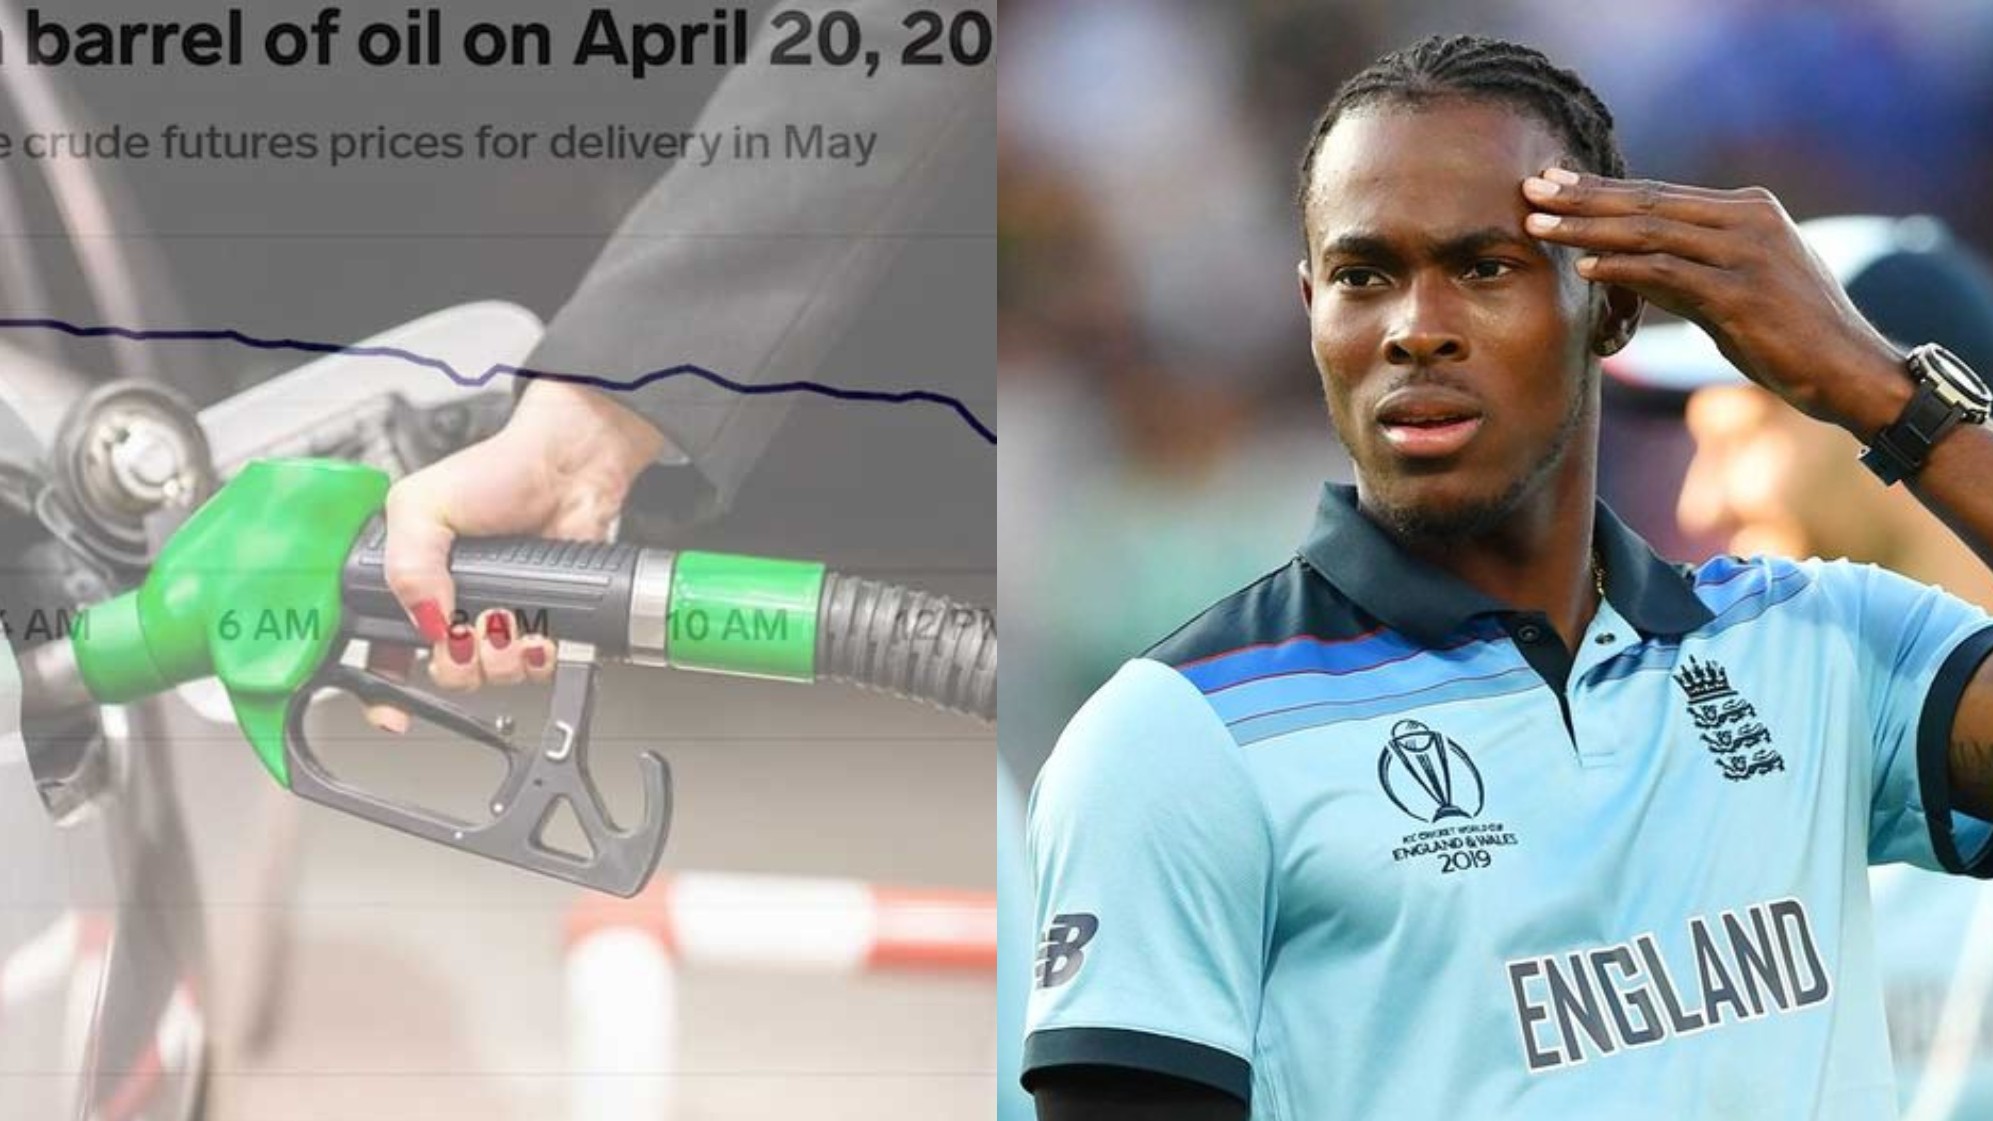 Jofra Archer’s old tweets about oil prices go viral as USA reports negative pricing for the first time